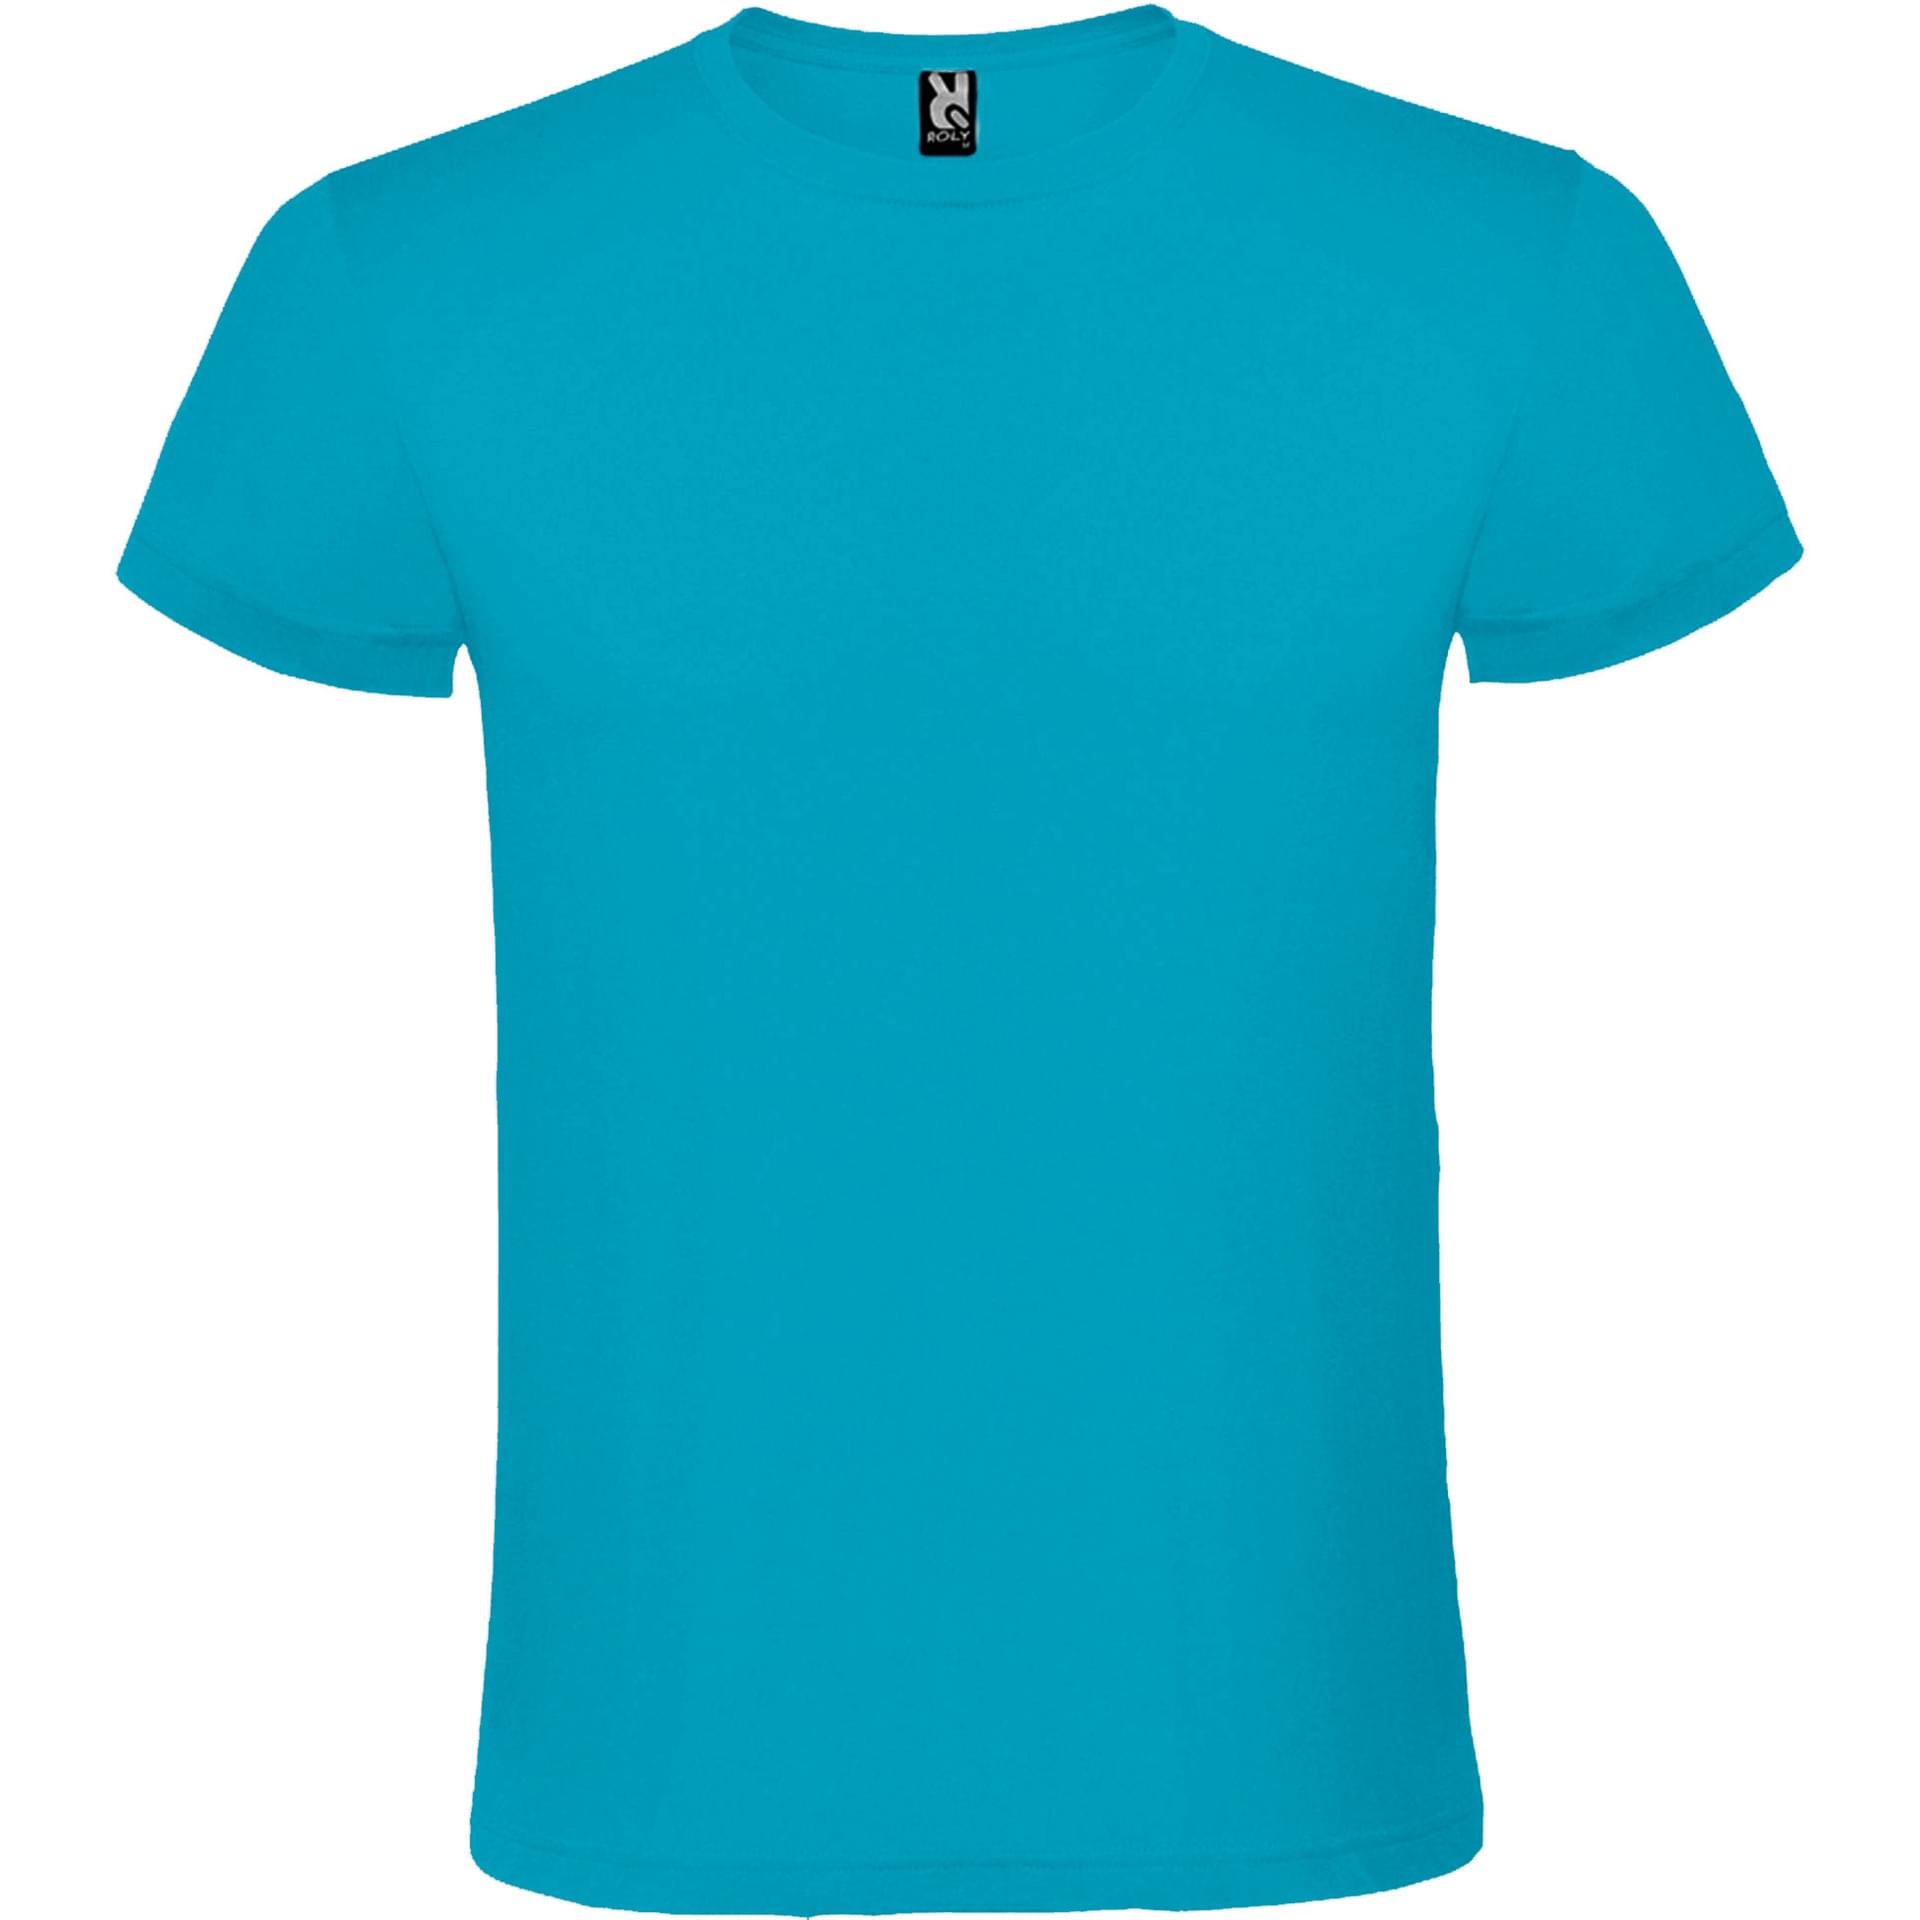 Tee-shirt personnalisé ATOMIC 150 roly turquoise